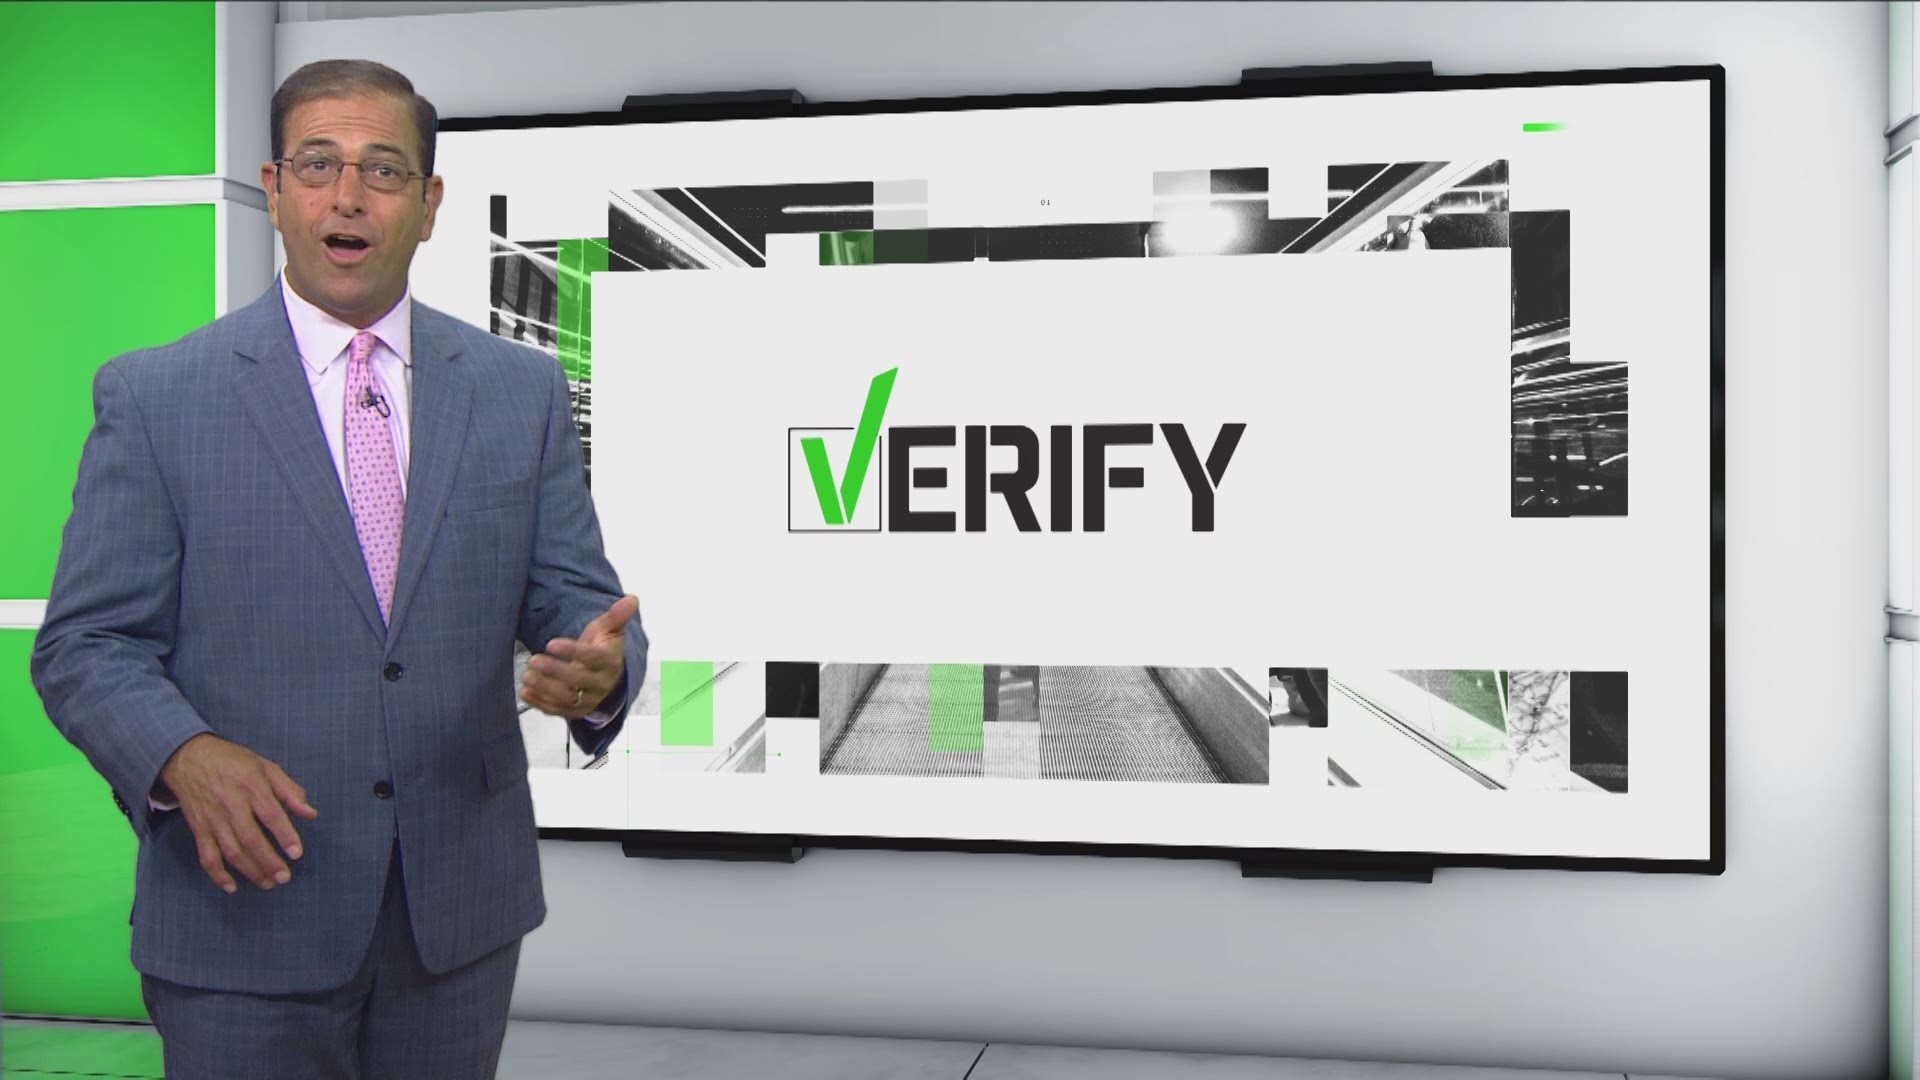 In a Verify twist, we're giving tips to help you verify whether the poll you're looking at is accurate.